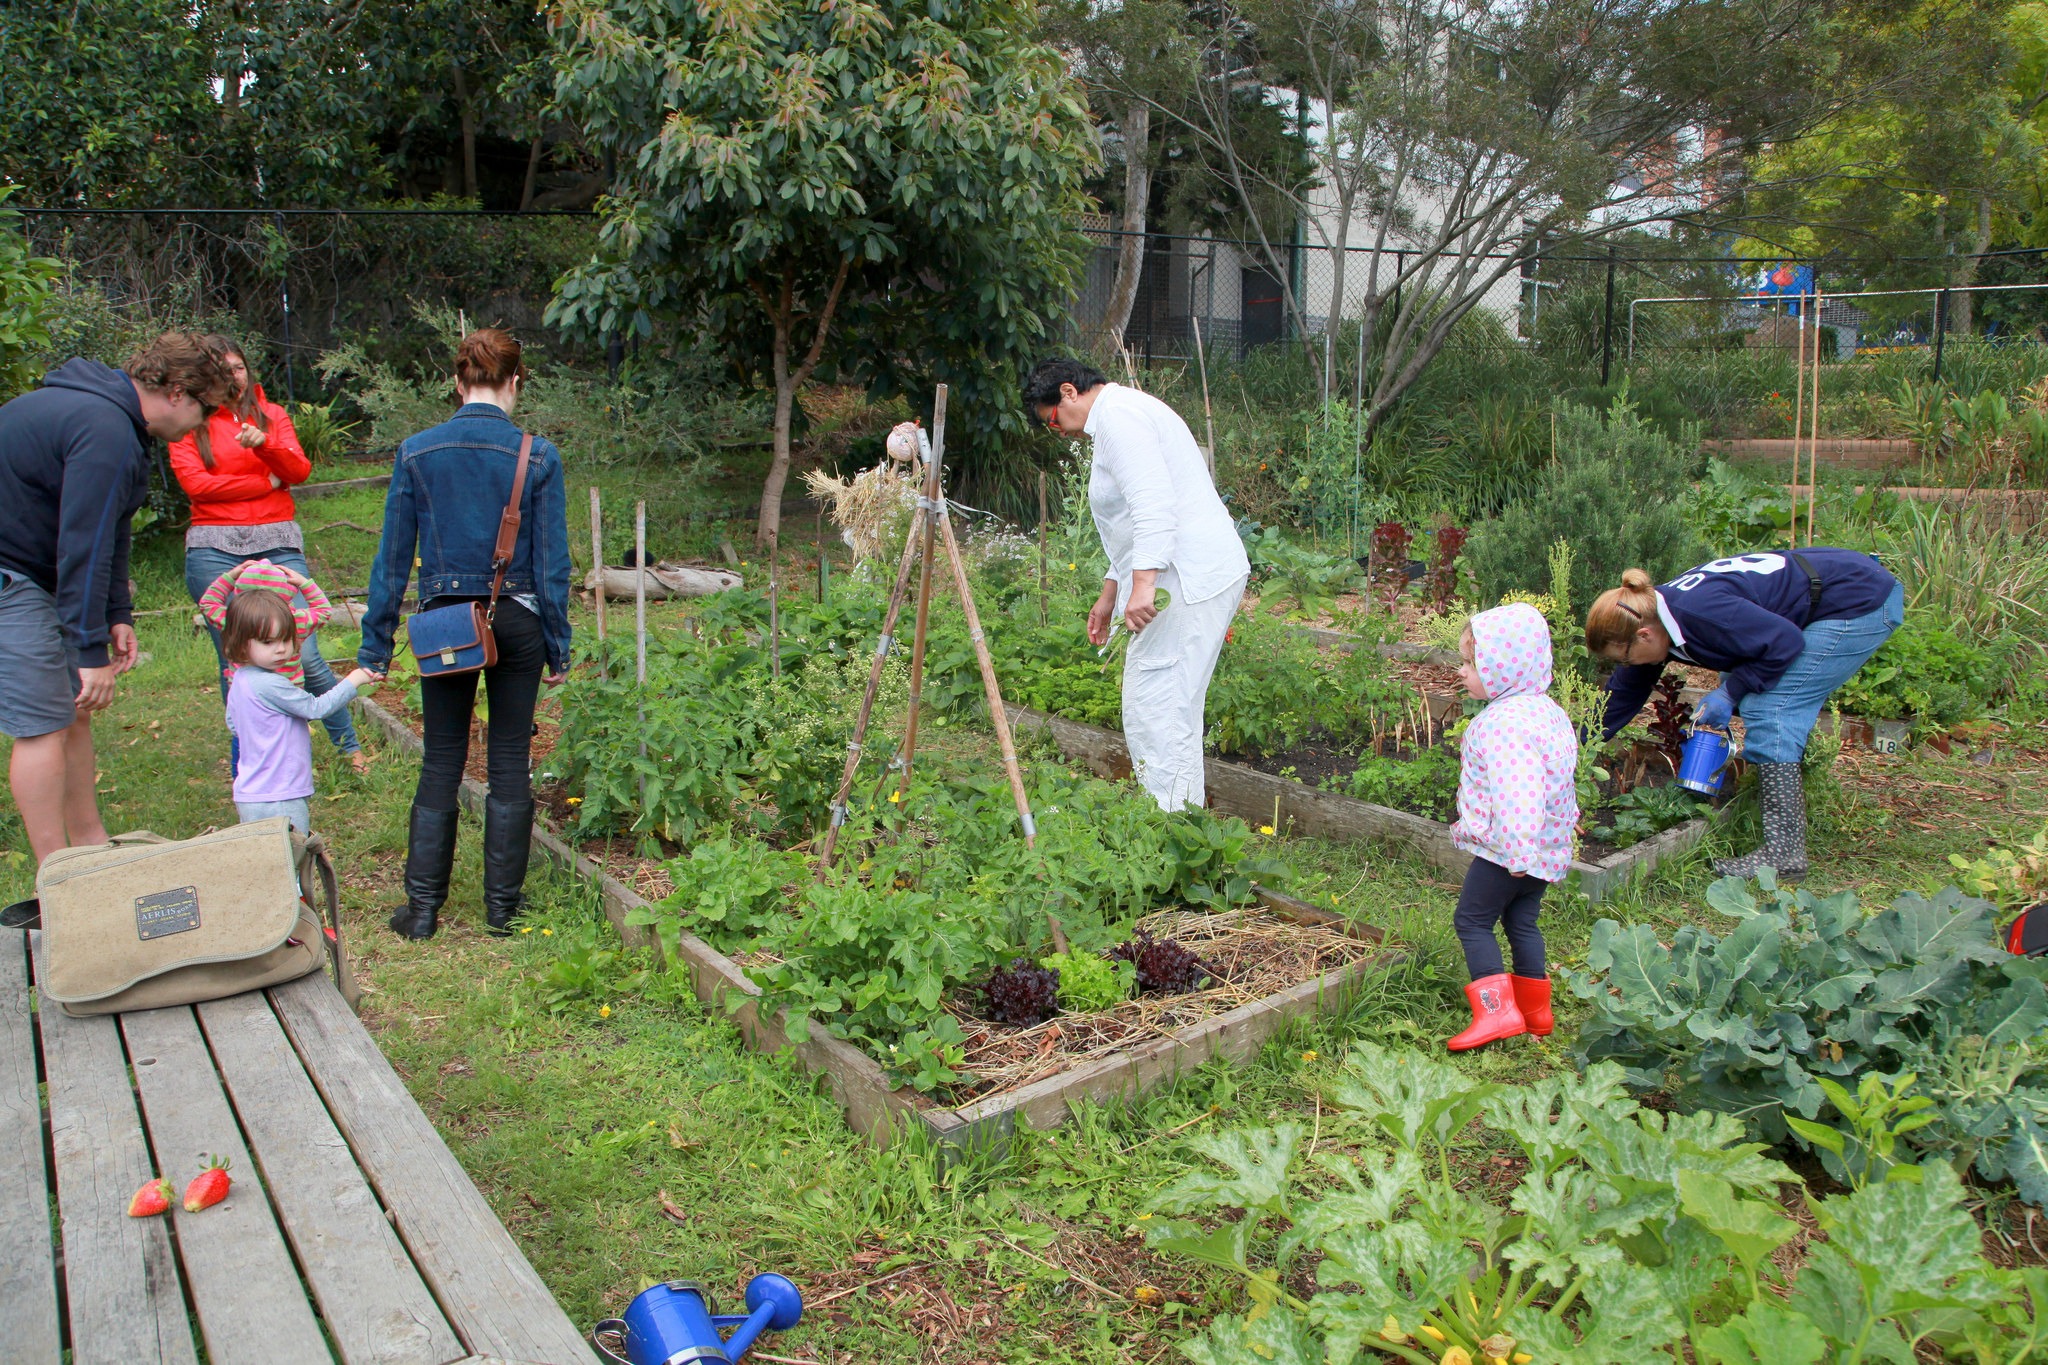 a group of people with their children working together to take care of the community garden